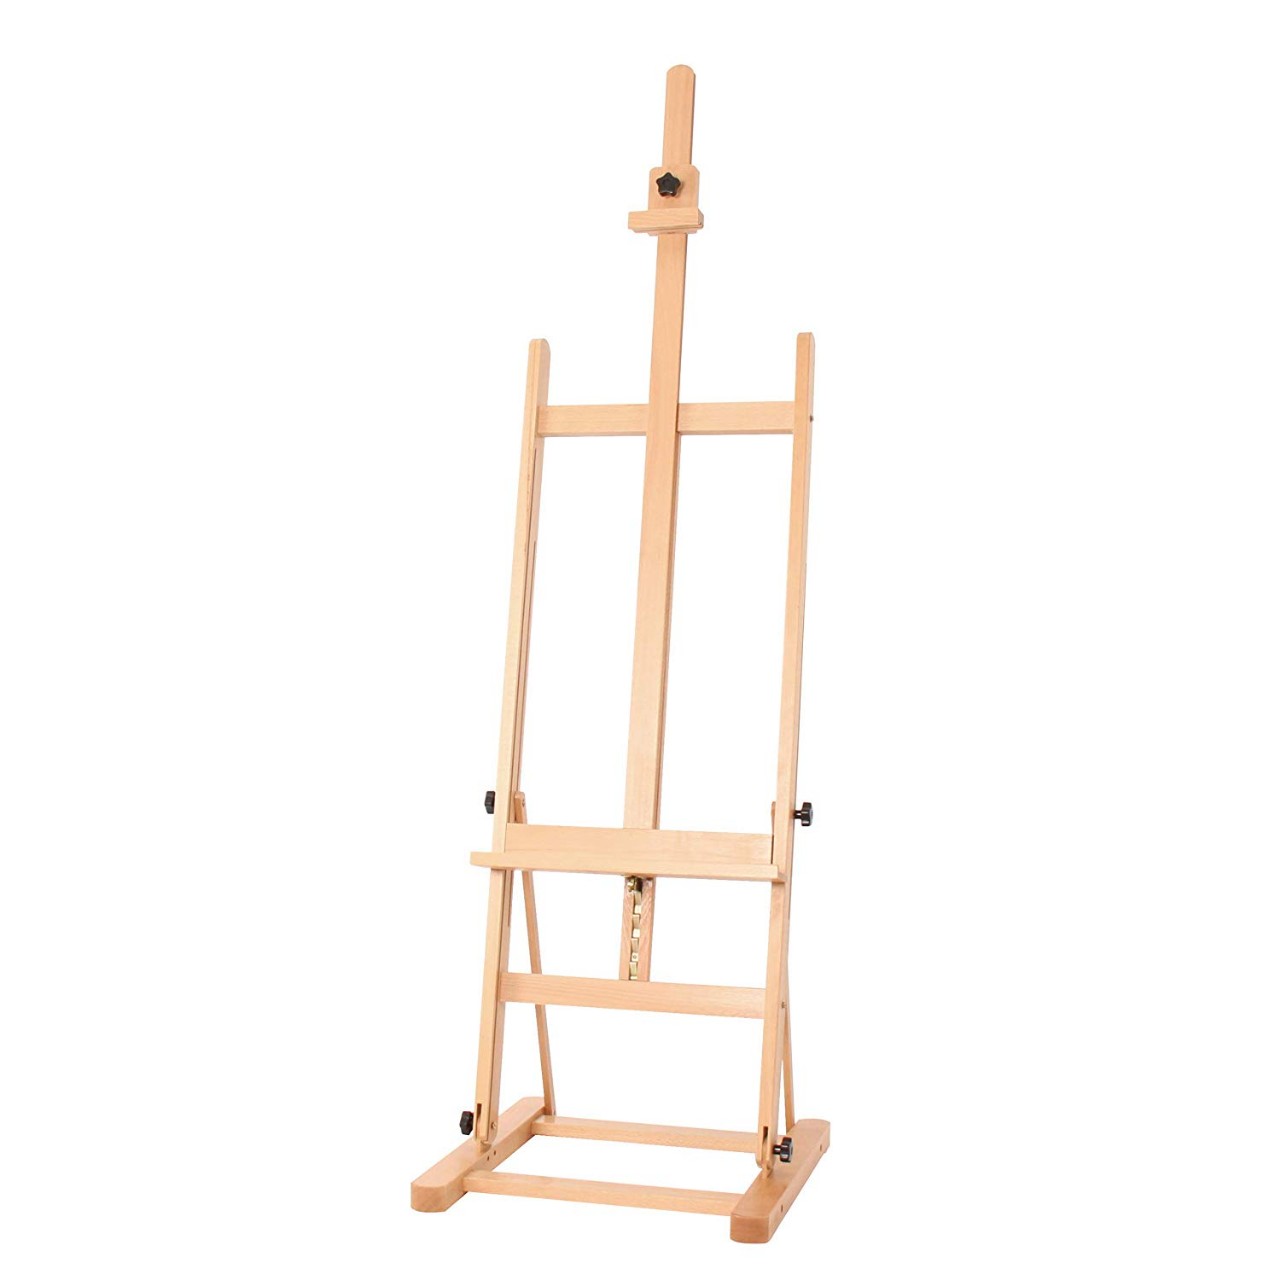 H-Frame Artist Painting Easel - 48 Inch Adjustable Studio Easels Made from Handcrafted Beechwood, Be